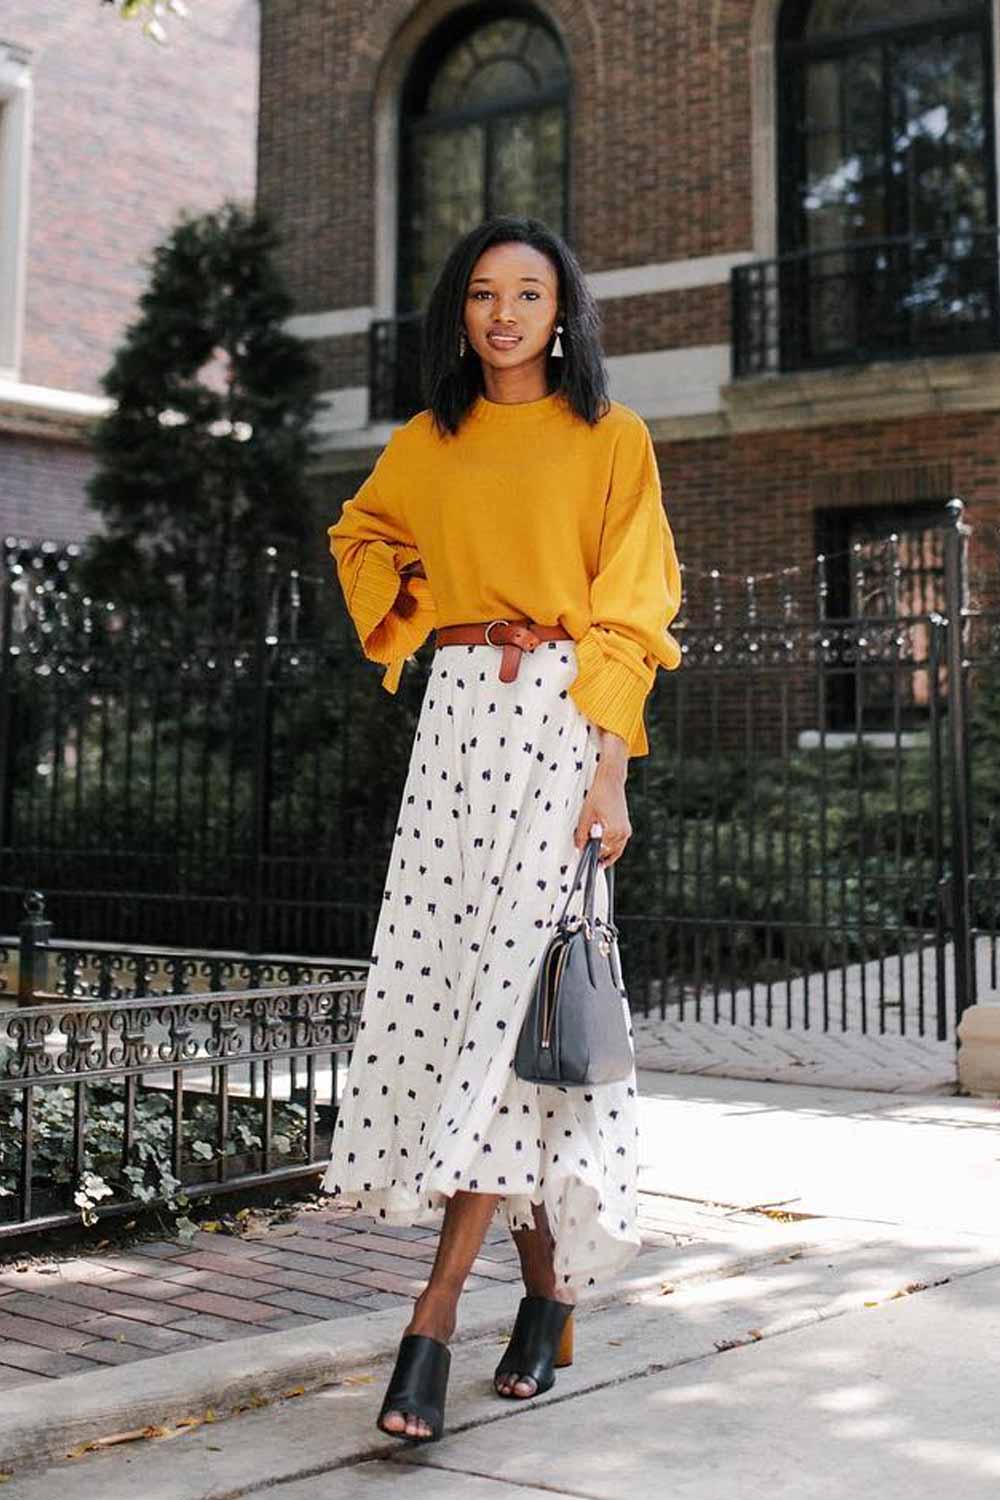 Long Skirt with Bright Sweater Outfits